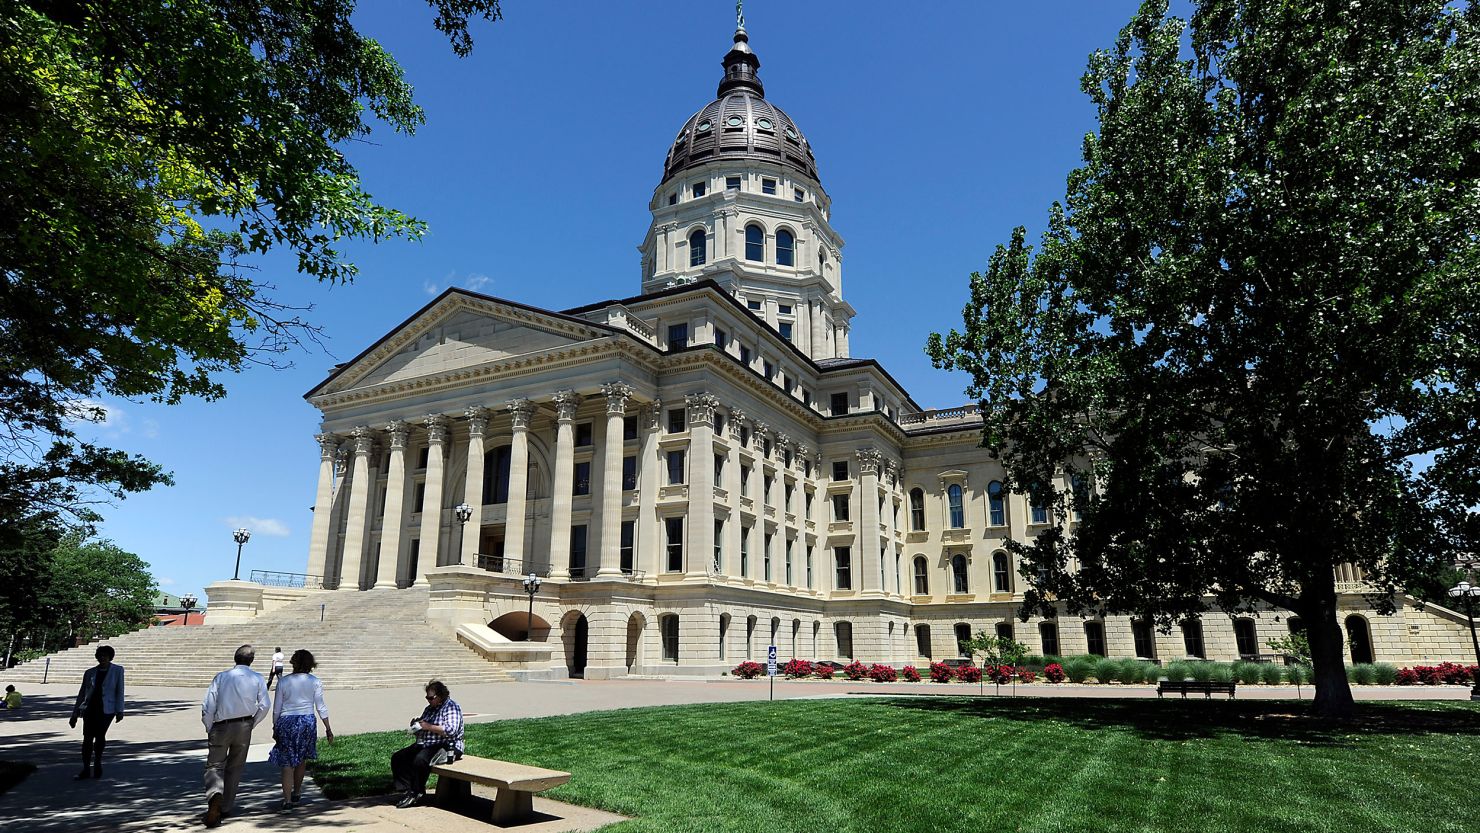 The Kansas State Capitol building is seen in Topeka, Kansas.